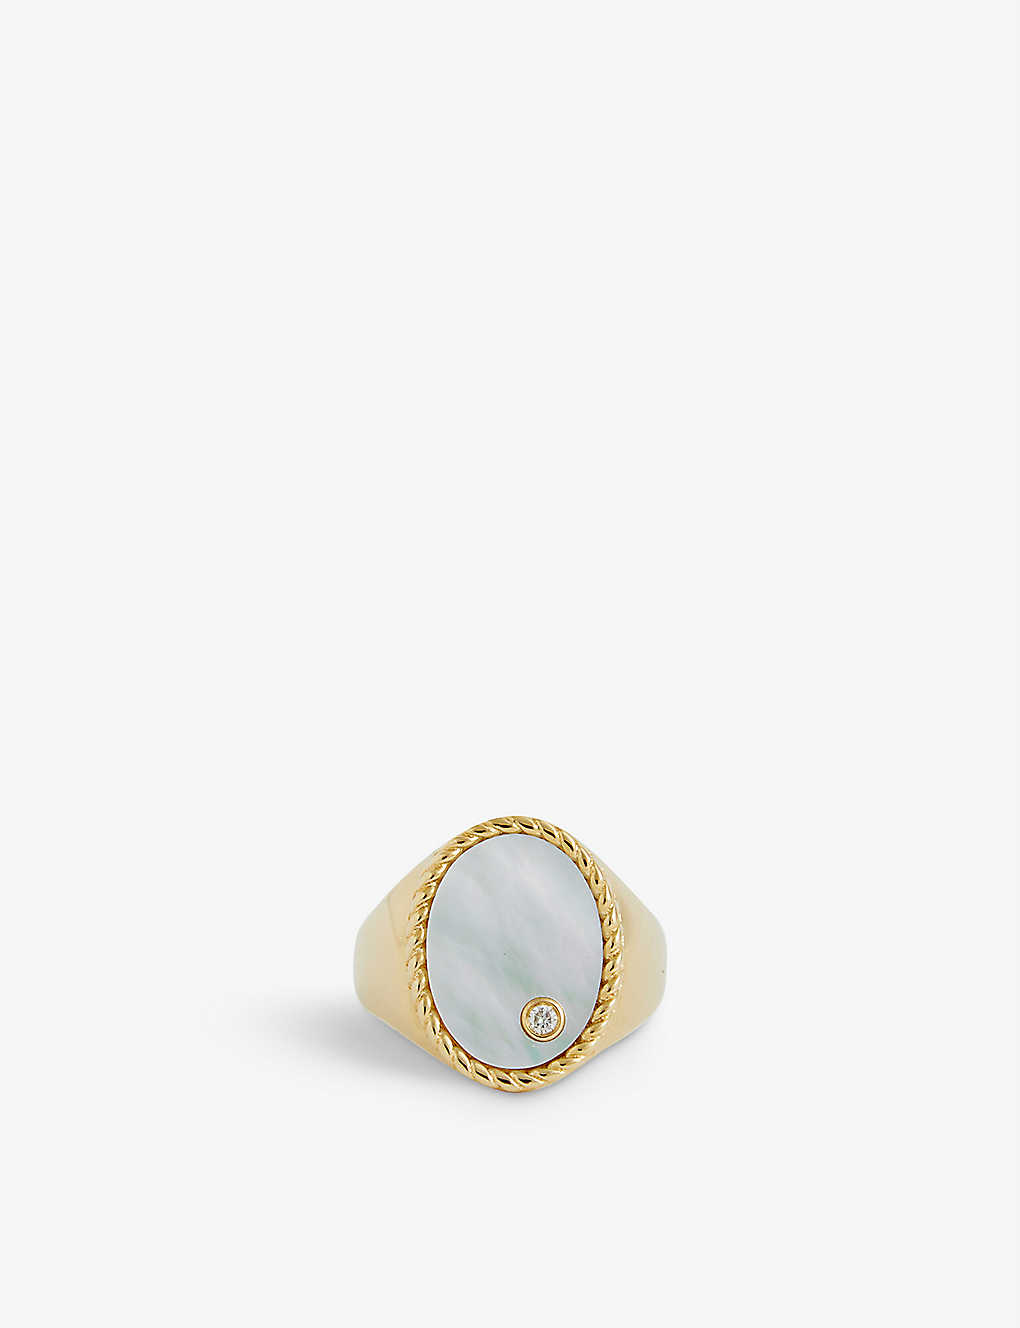 Yvonne Léon Yvonne Leon Women's 9k Yg Pearl Oval 9ct Yellow Gold, 0.015ct Diamond And Mother-of-pearl Signet Rin